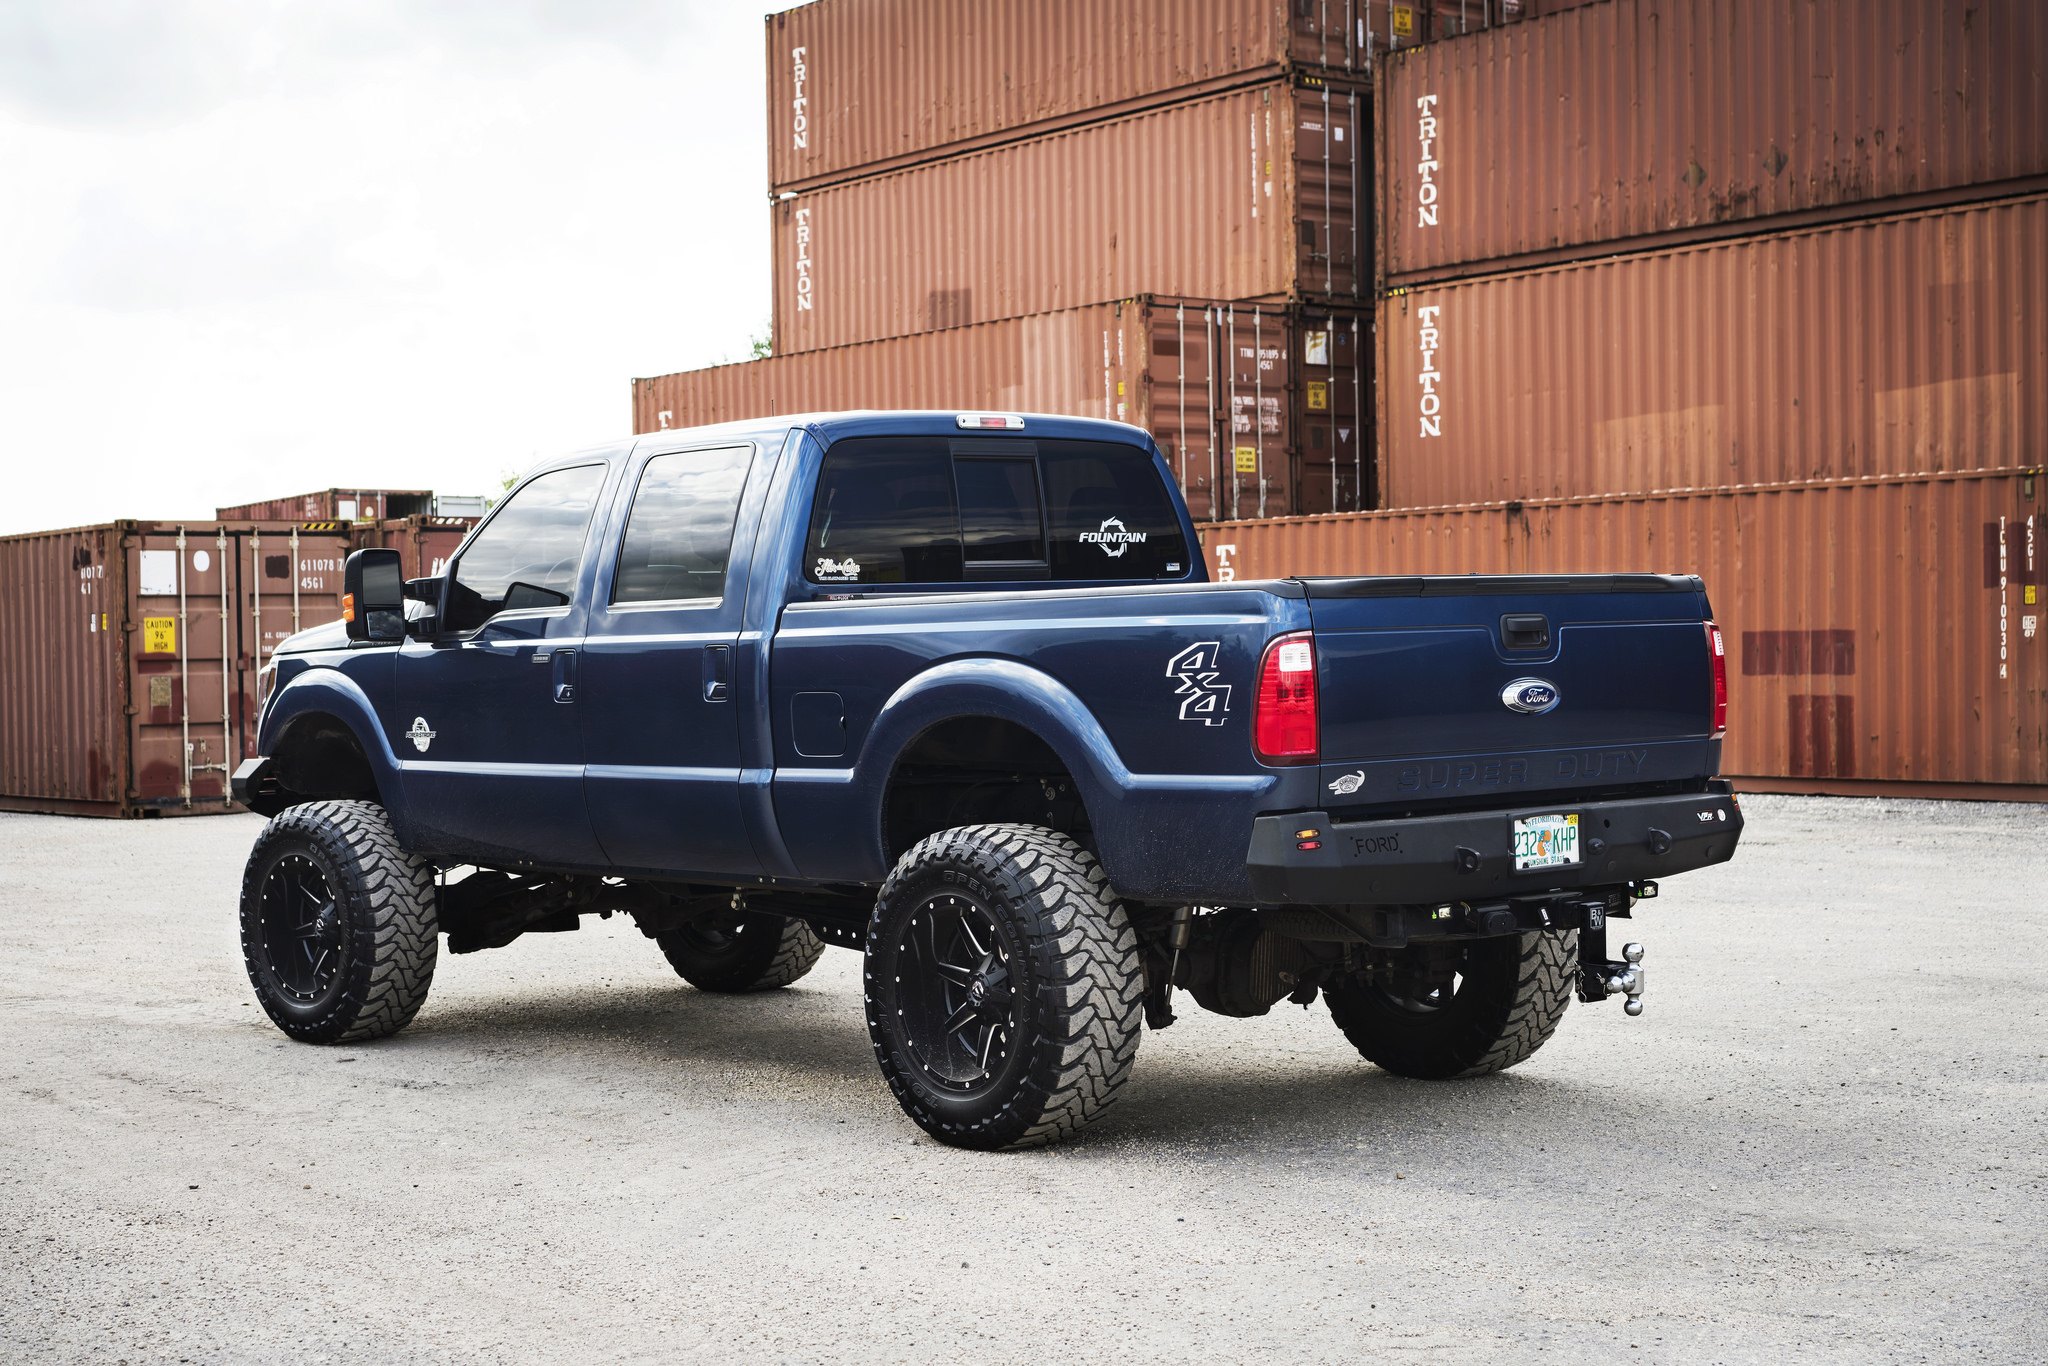 Hitch Receiver on Blue Lifted Ford F-250 - Photo by Fuel Offroad